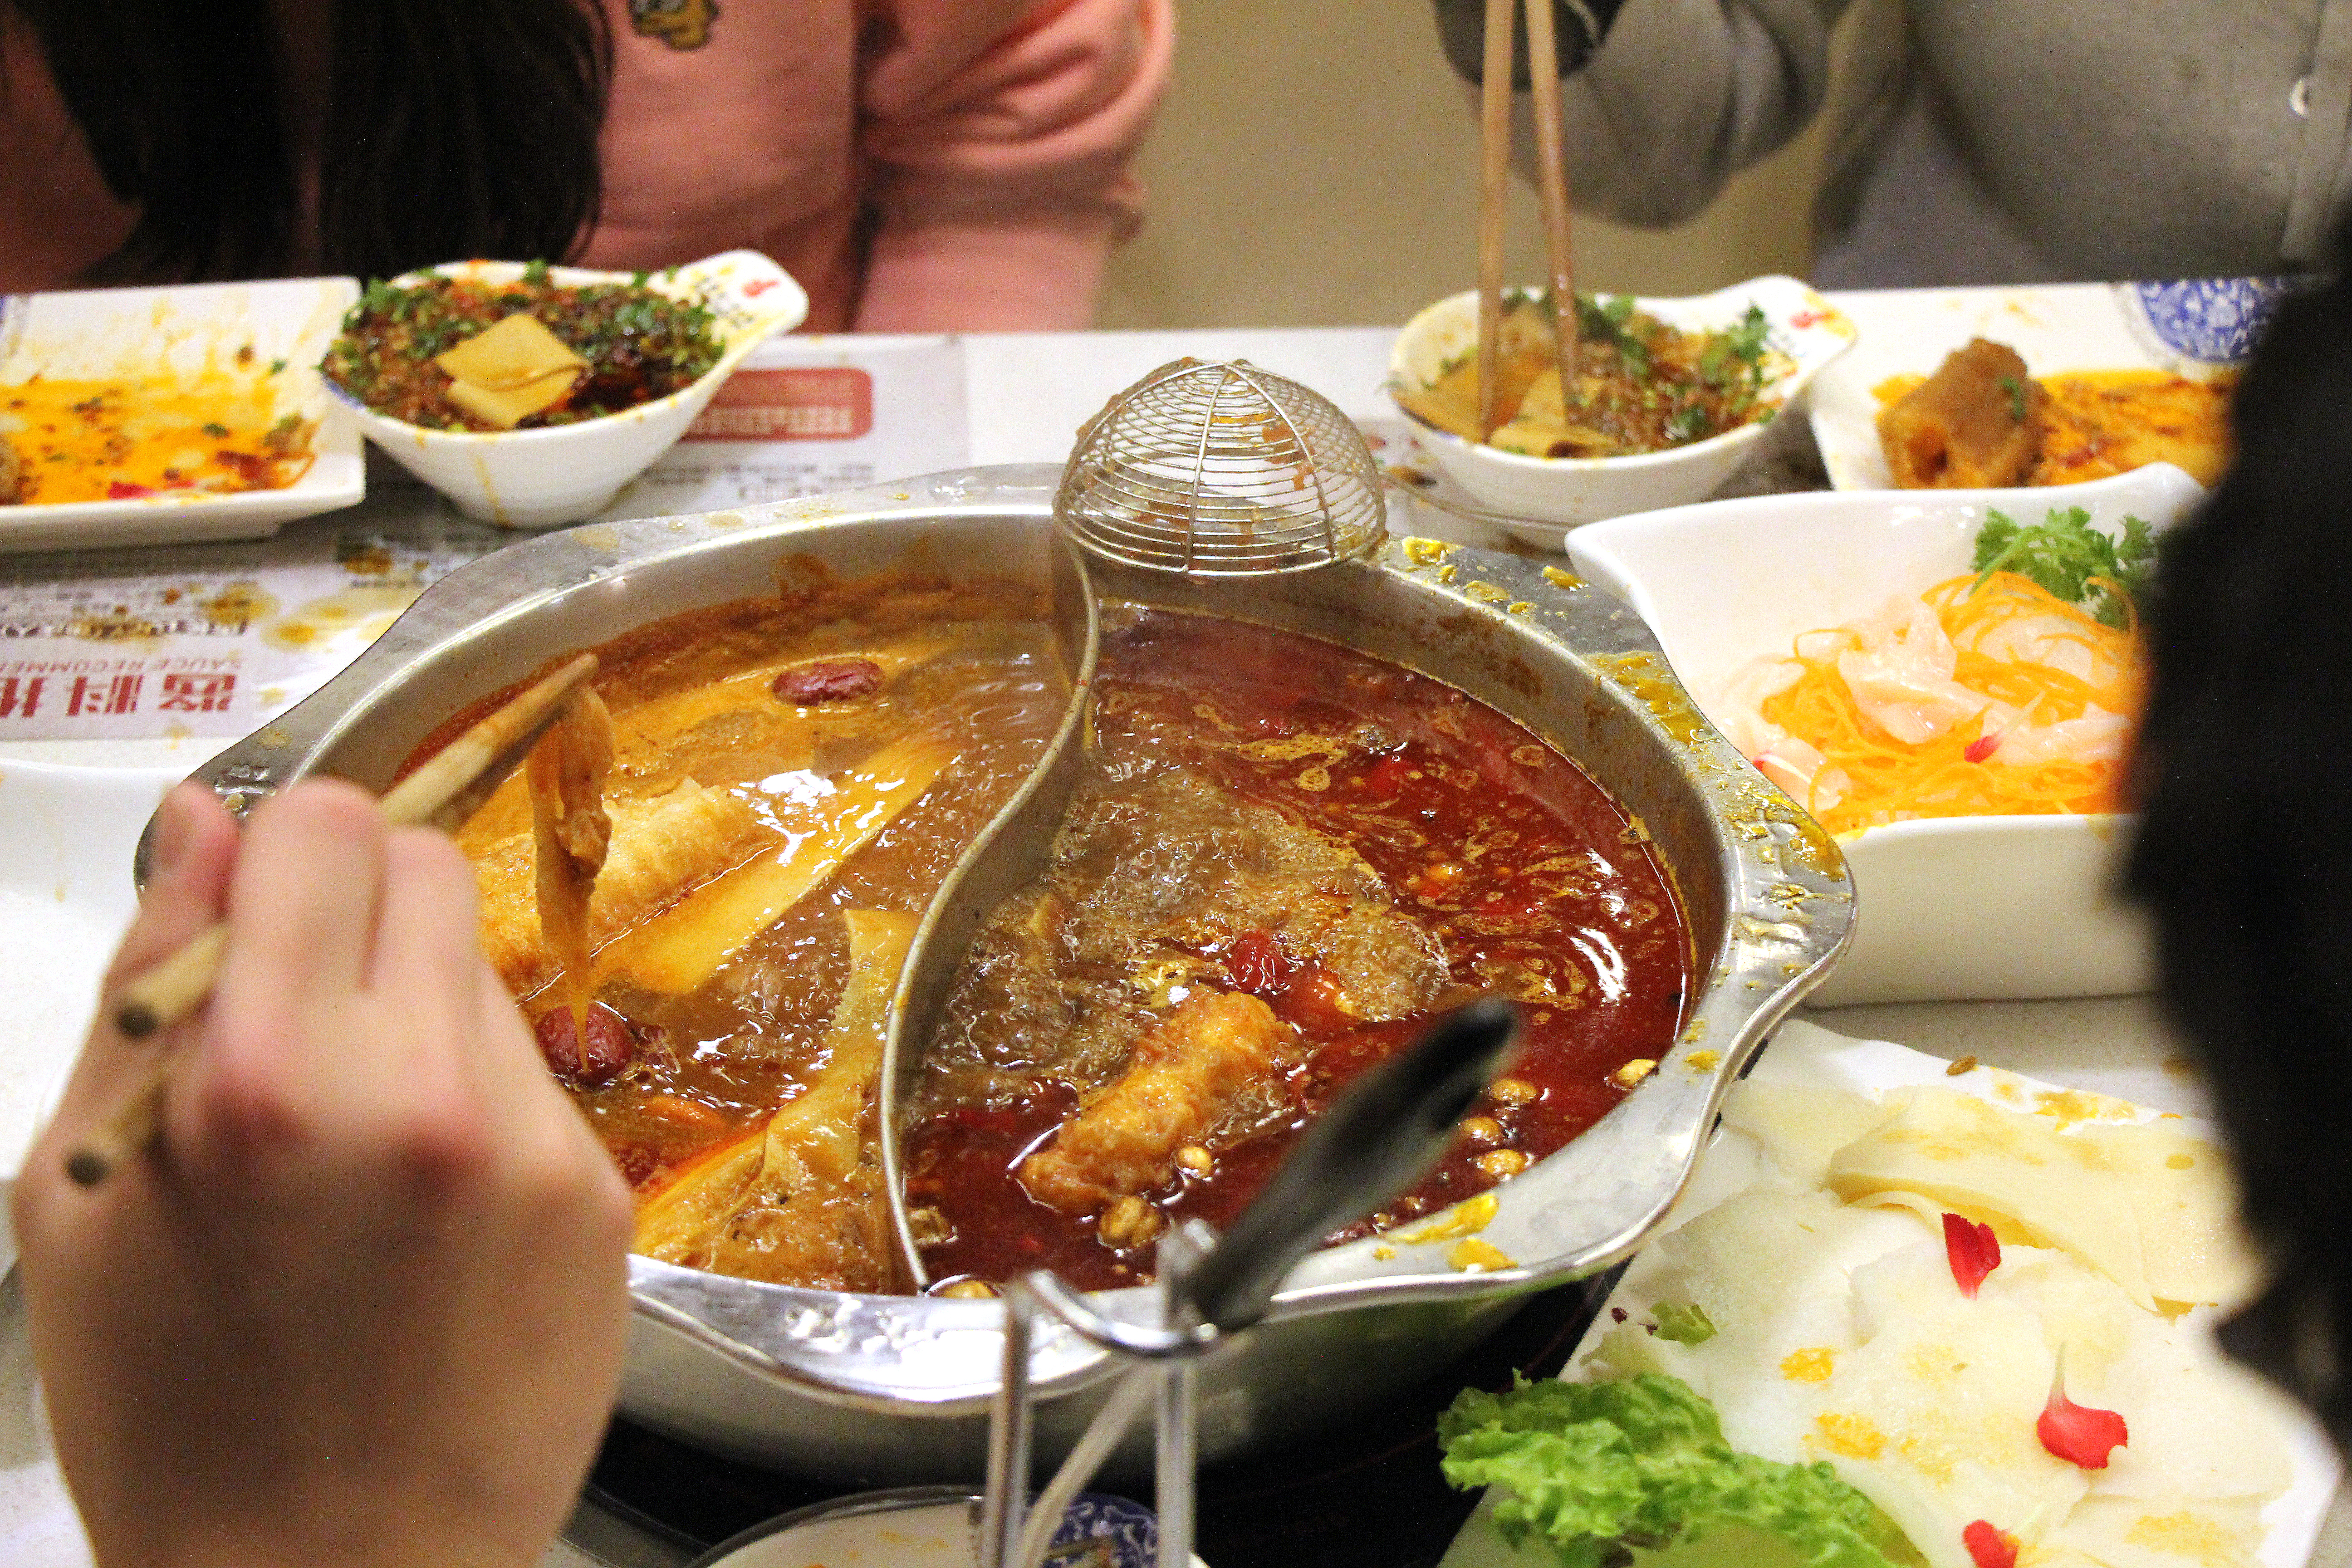 A hand lifts food from a silver hot pot bowl with a divider in the middle.